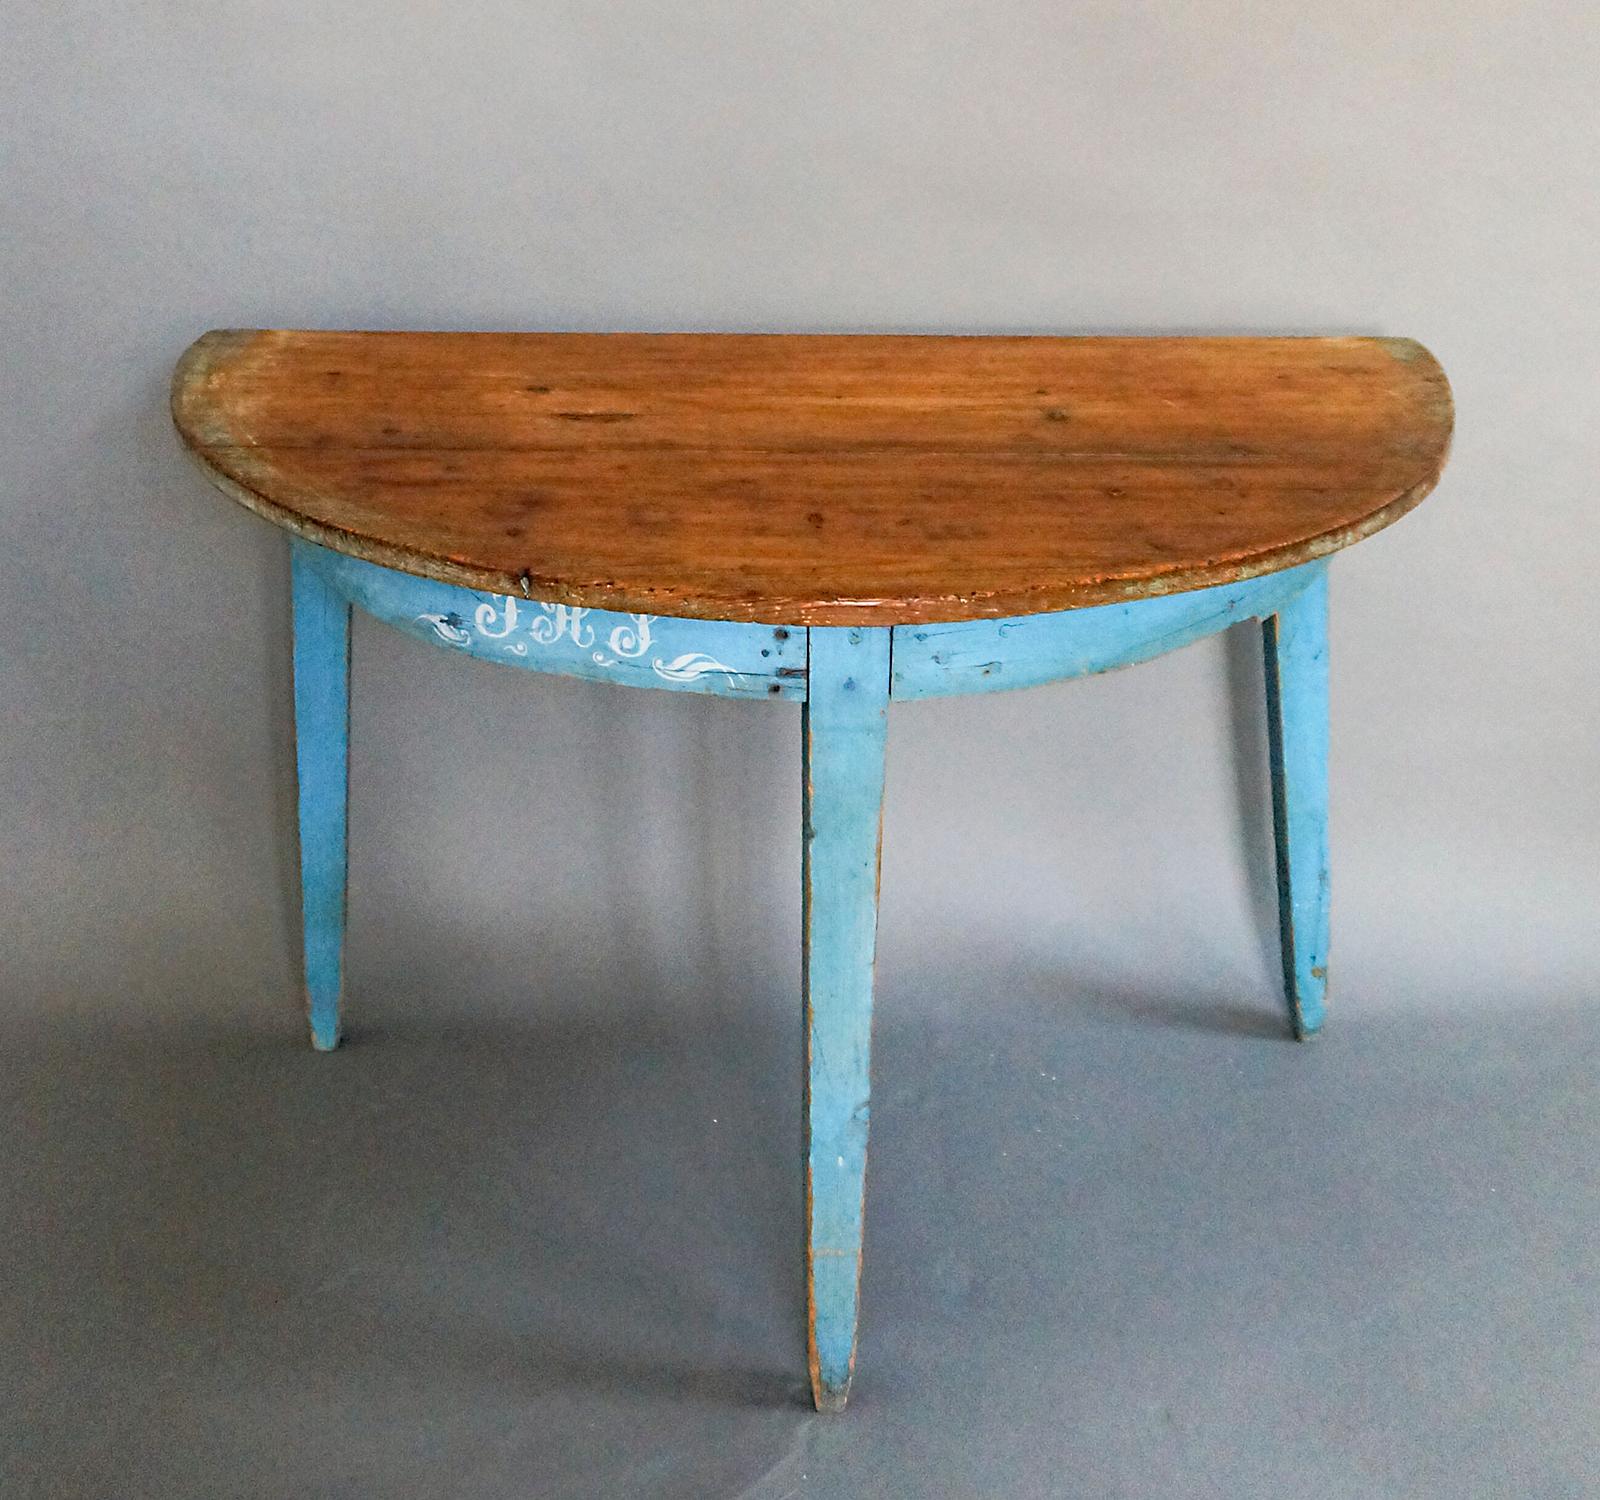 Demilune table from Hälsingland, Sweden, circa 1840. All original, and very Swedish!